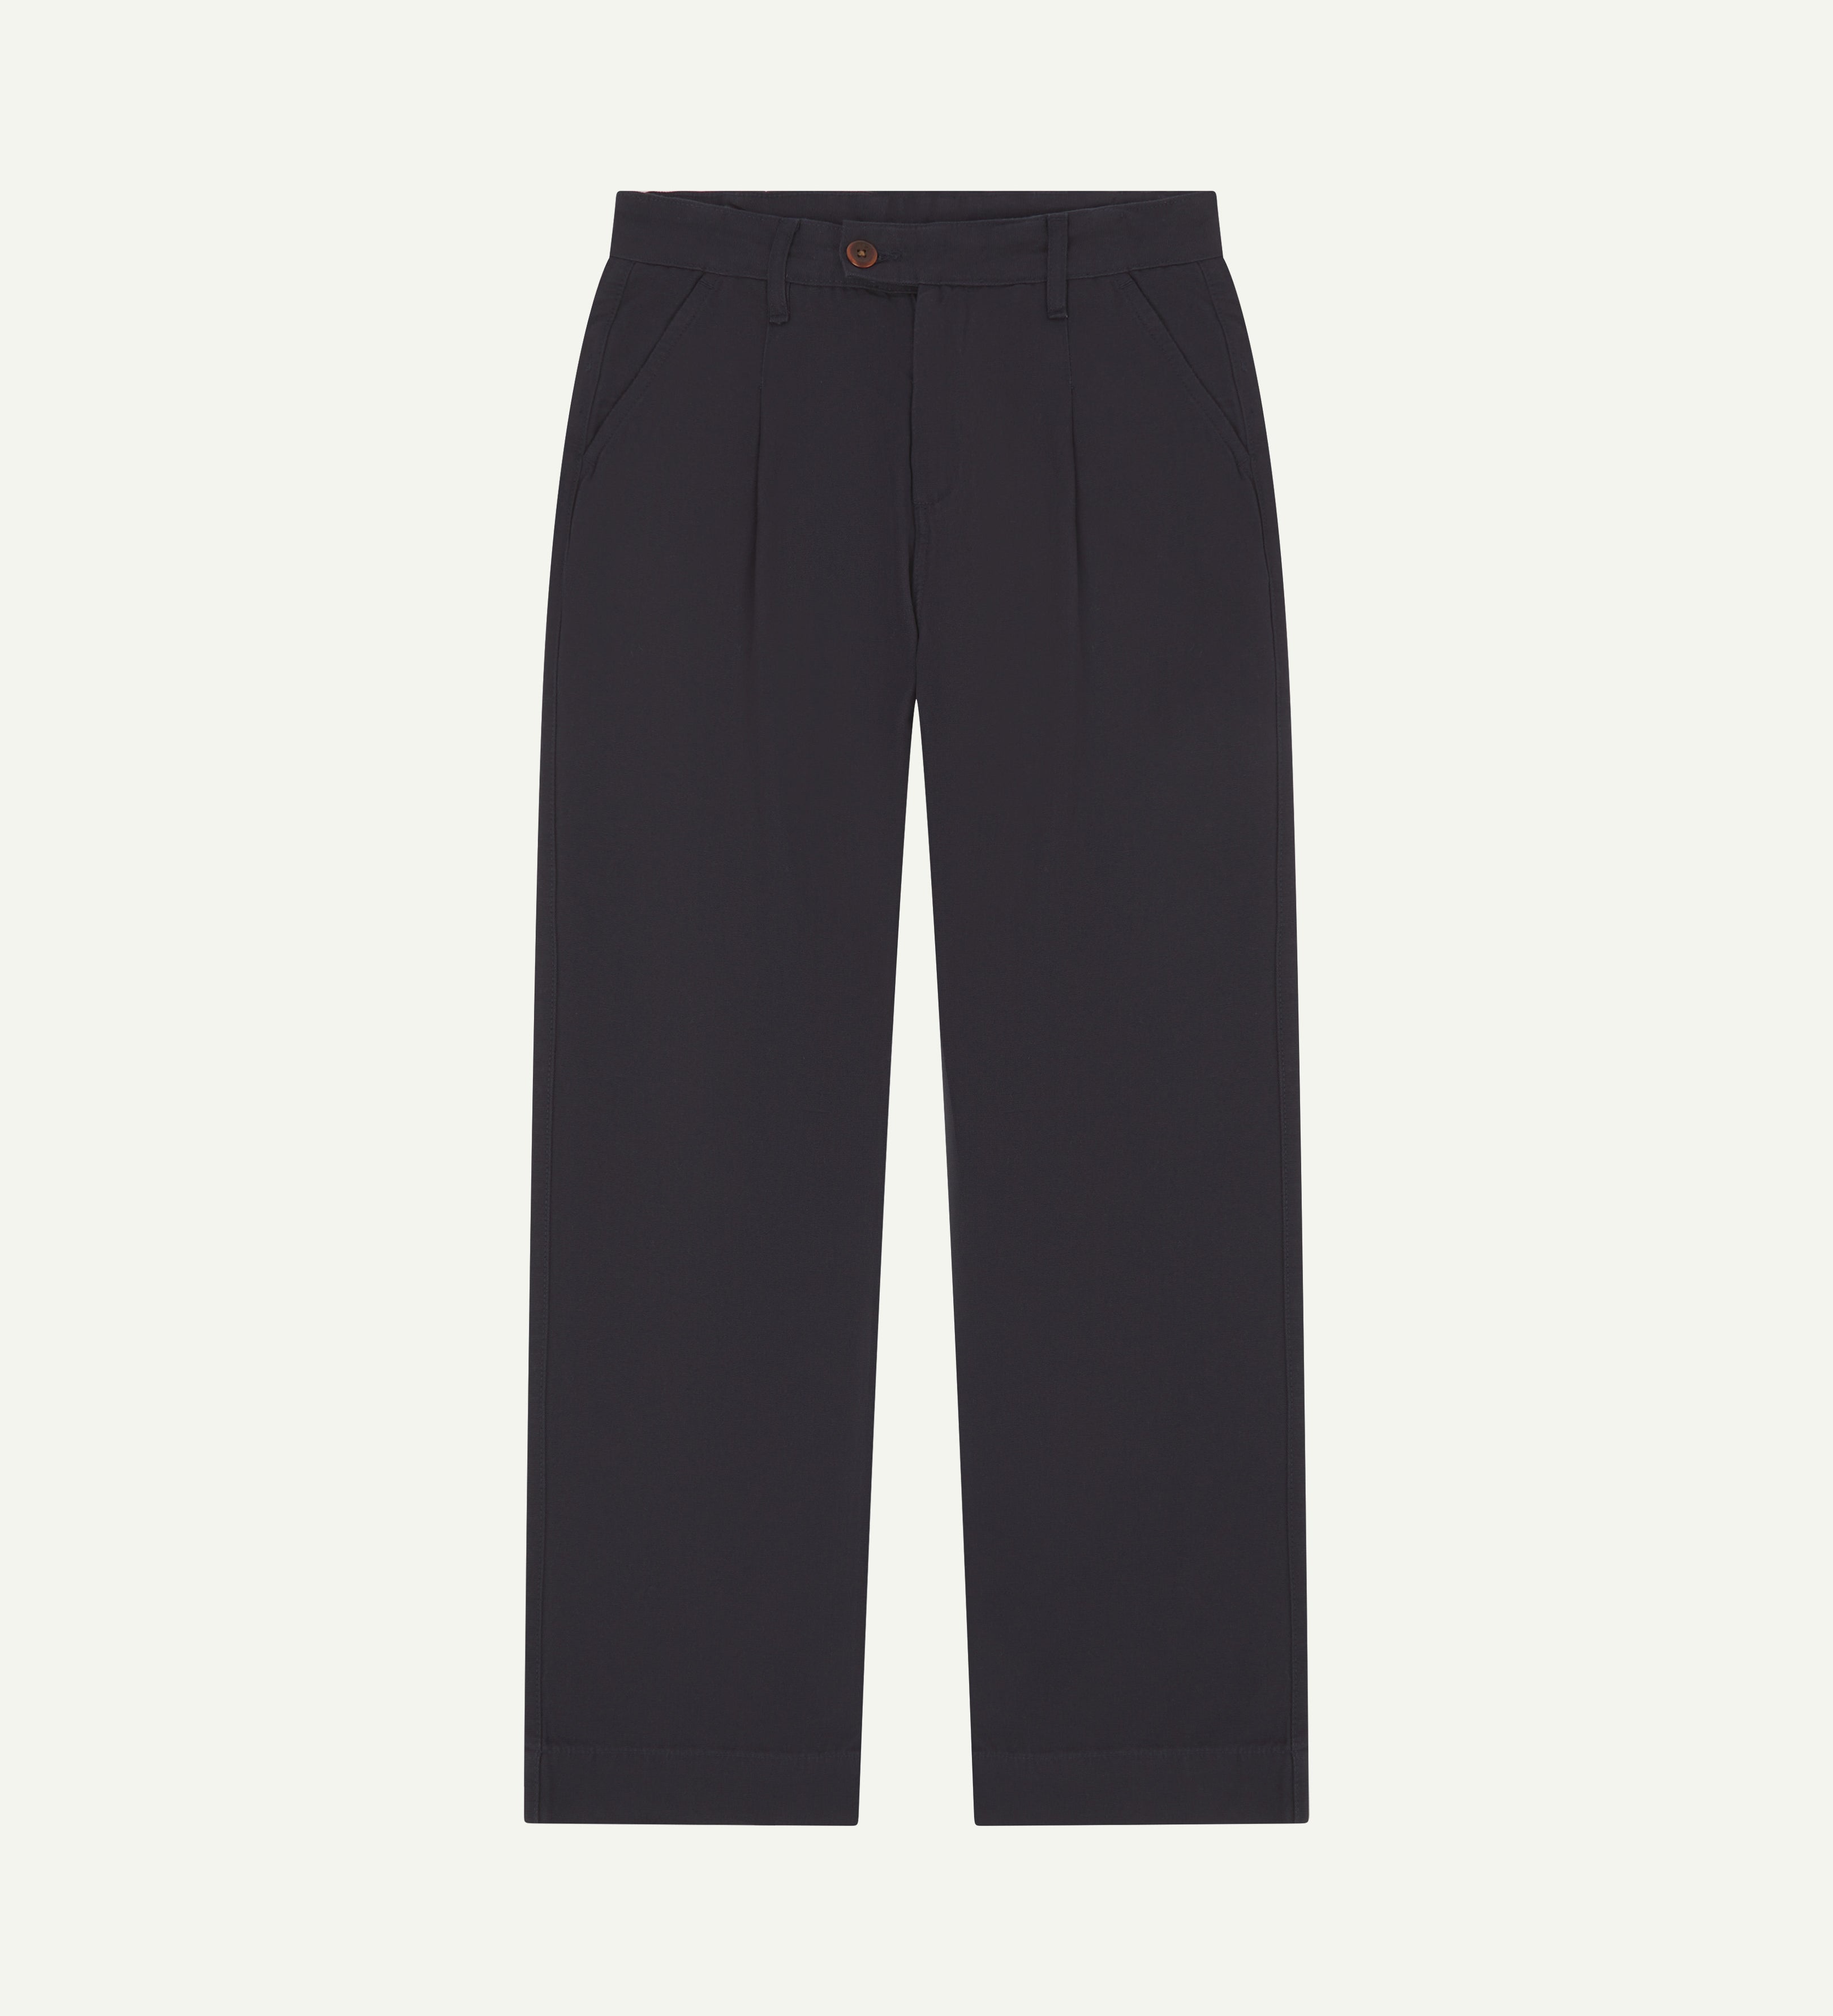 Front flat shot of #5018 Uskees men's organic mid-weight cotton boat trousers in navy blue showing wide leg style